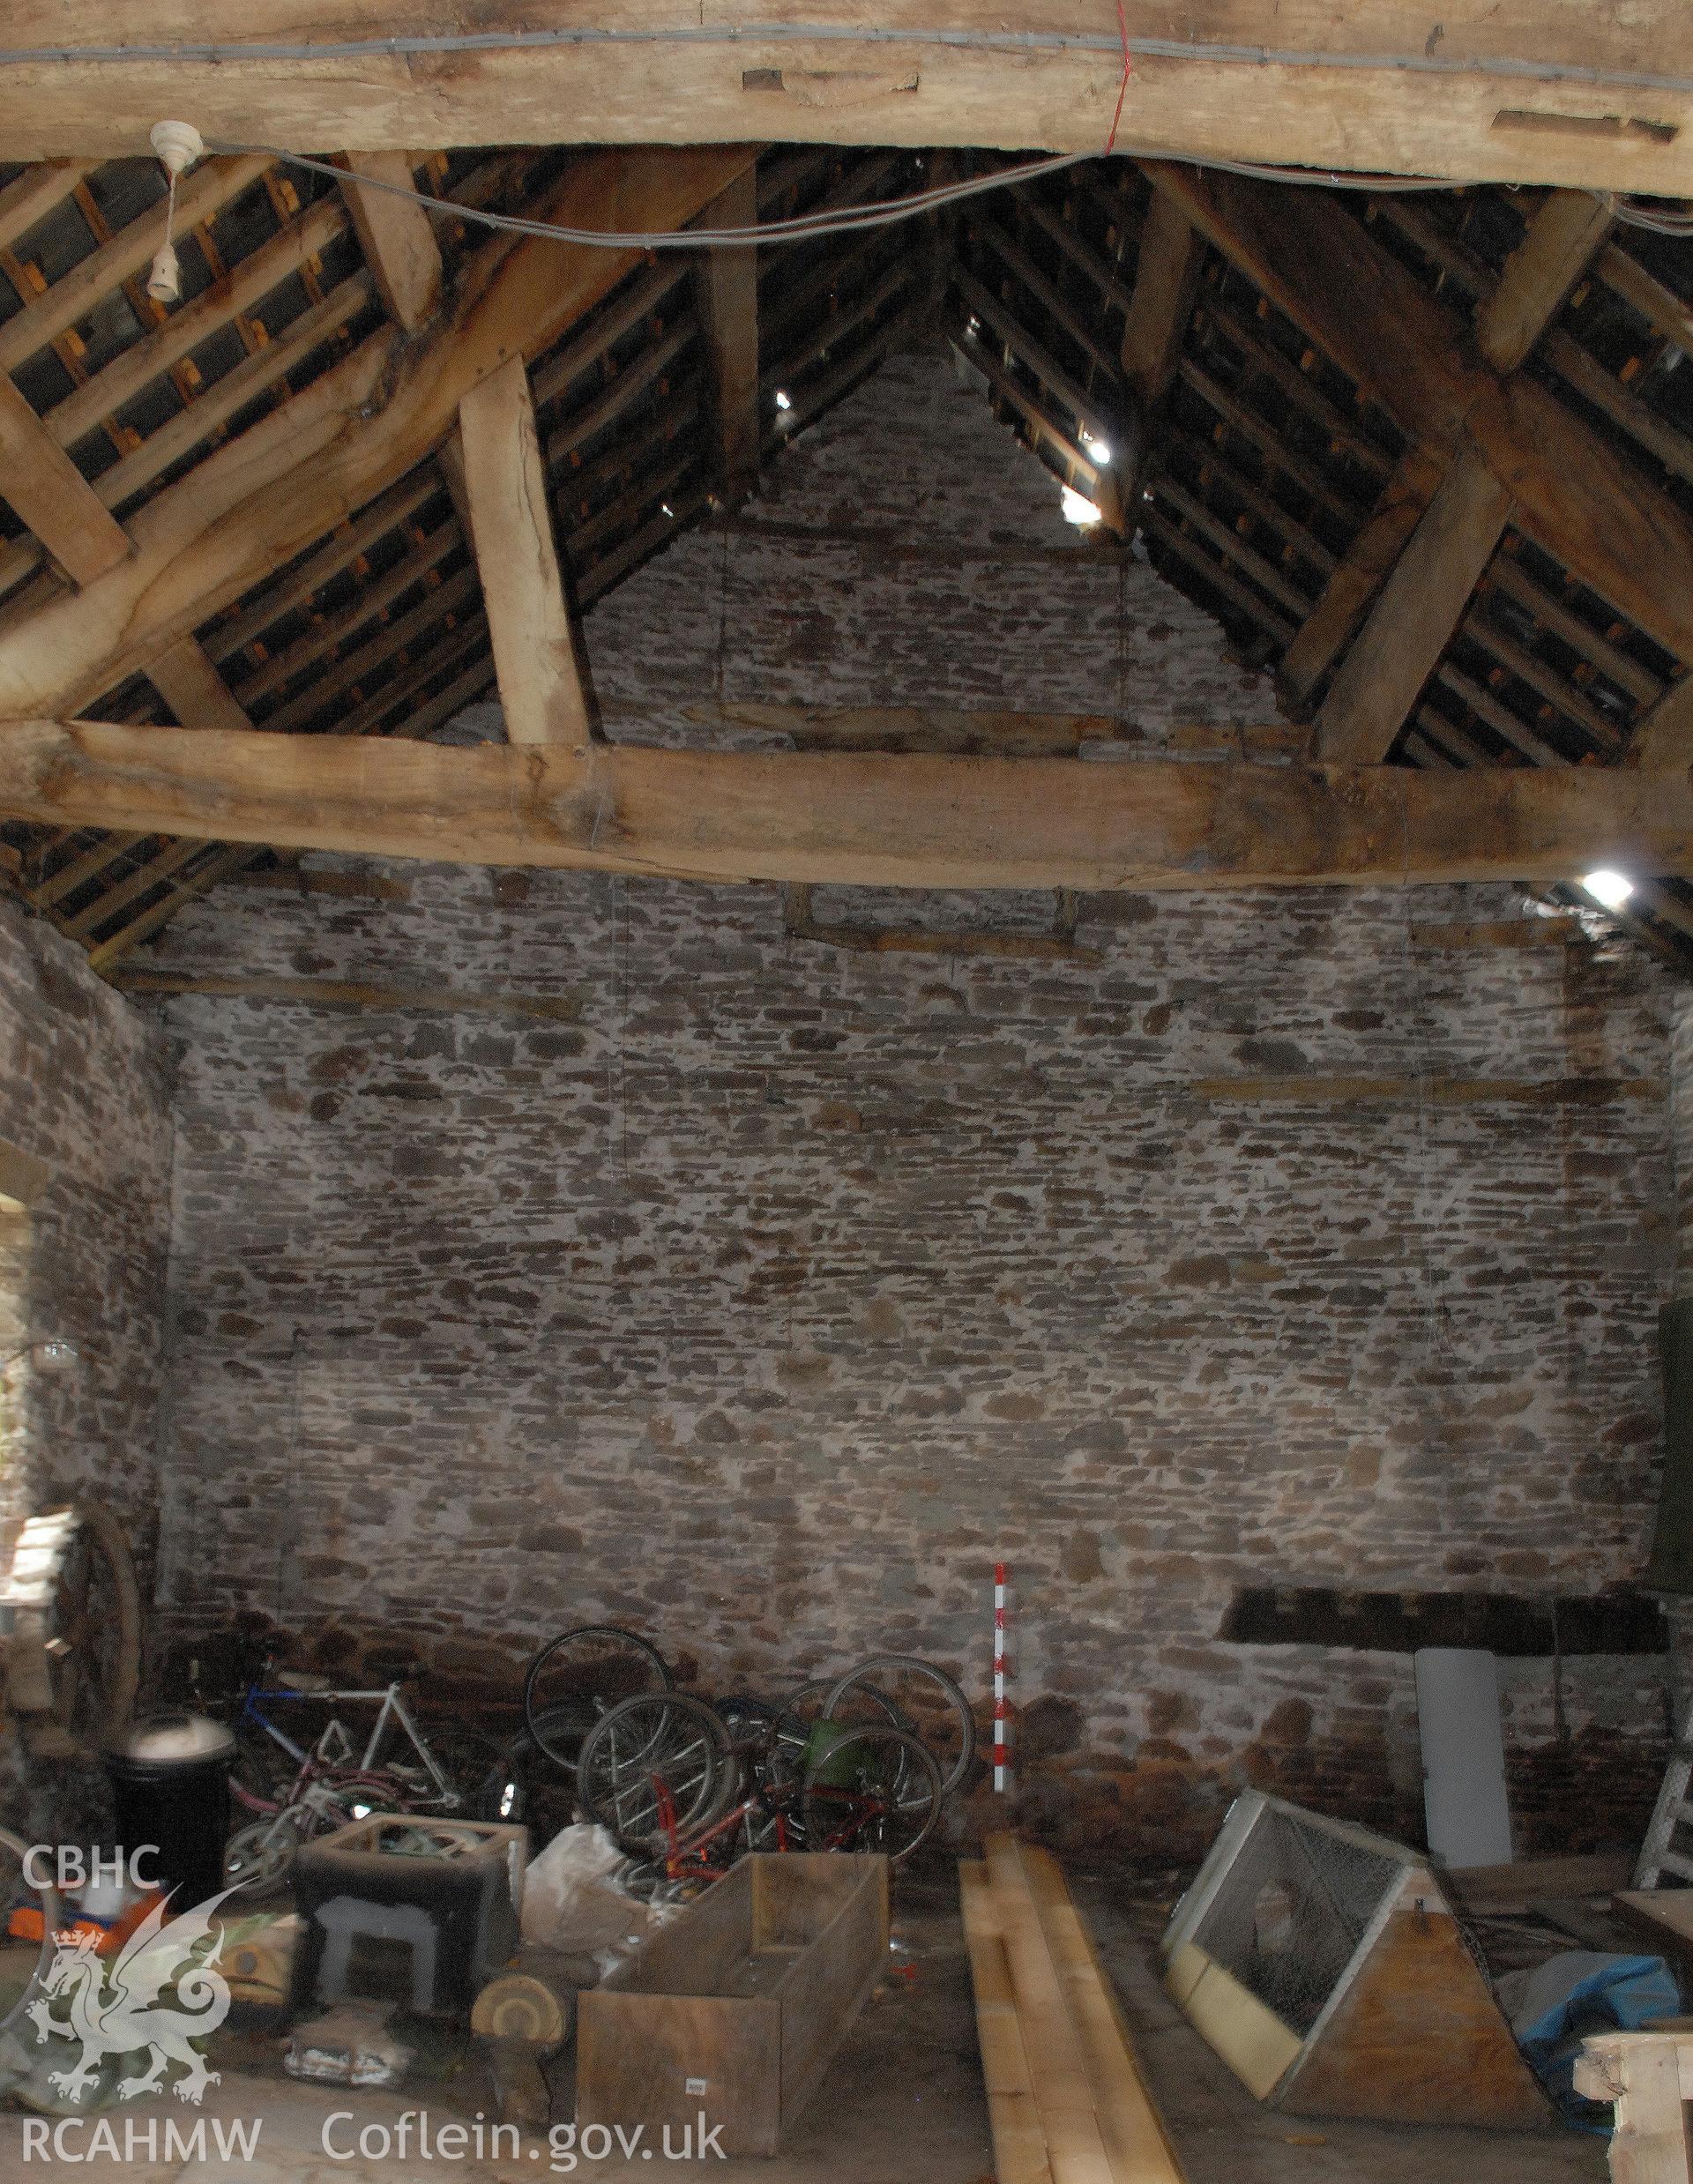 Interior view of the barn from the south.